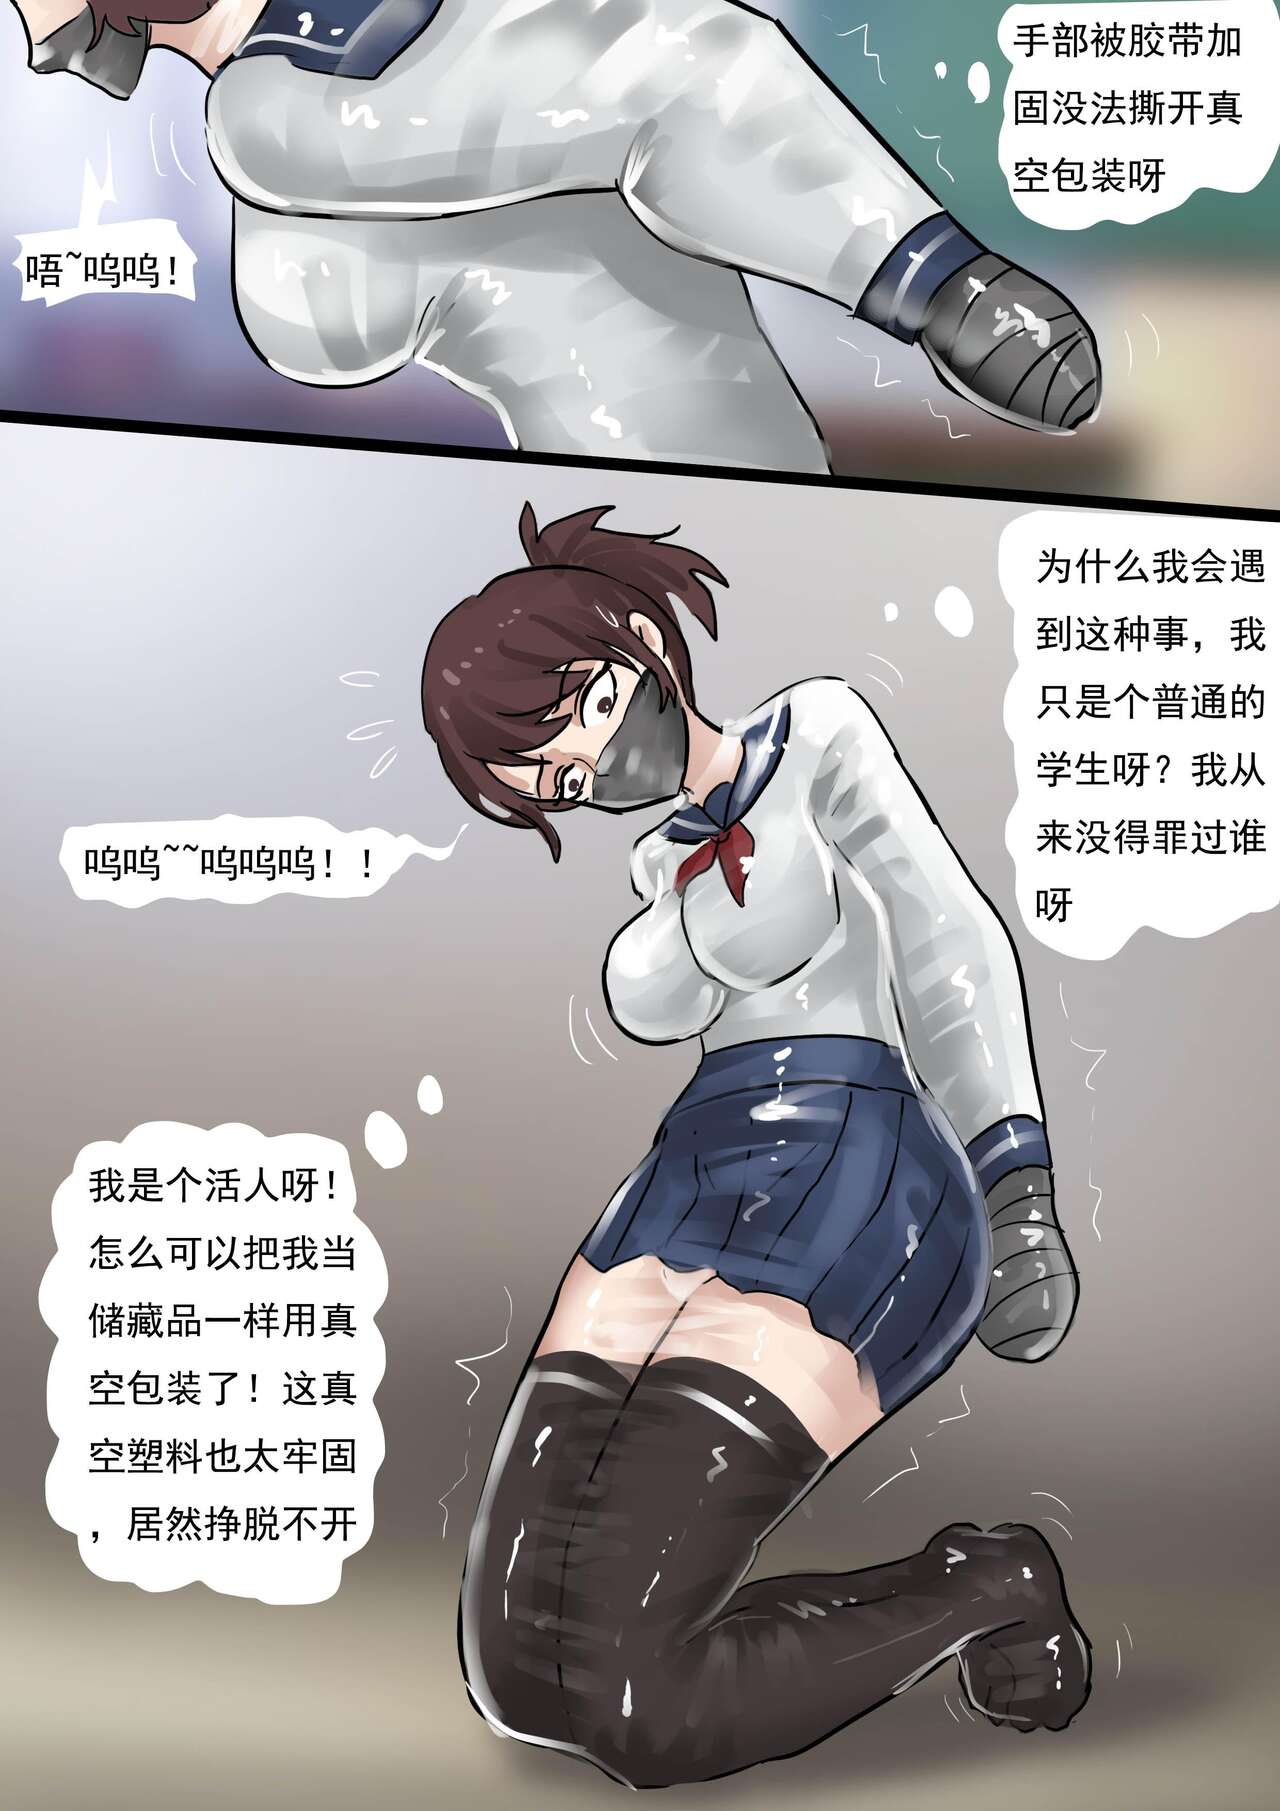 [King] 被真空全包的水手服少女 Sailor suit girl covered by vacuum [Chinese] 